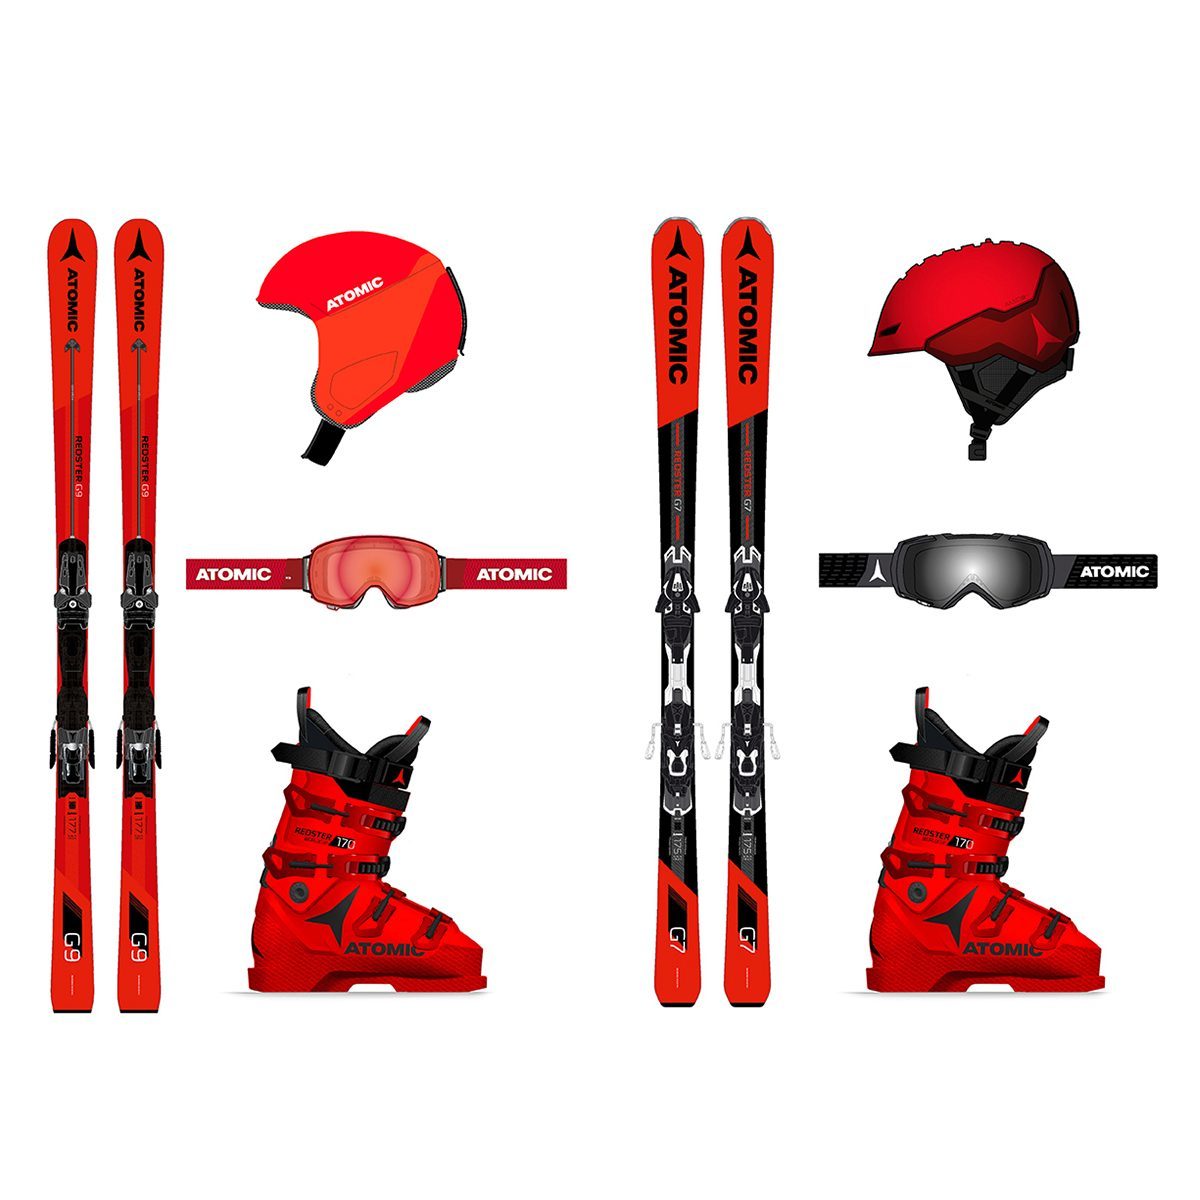 Atomic Redster series including skis, boots, goggles and helmets